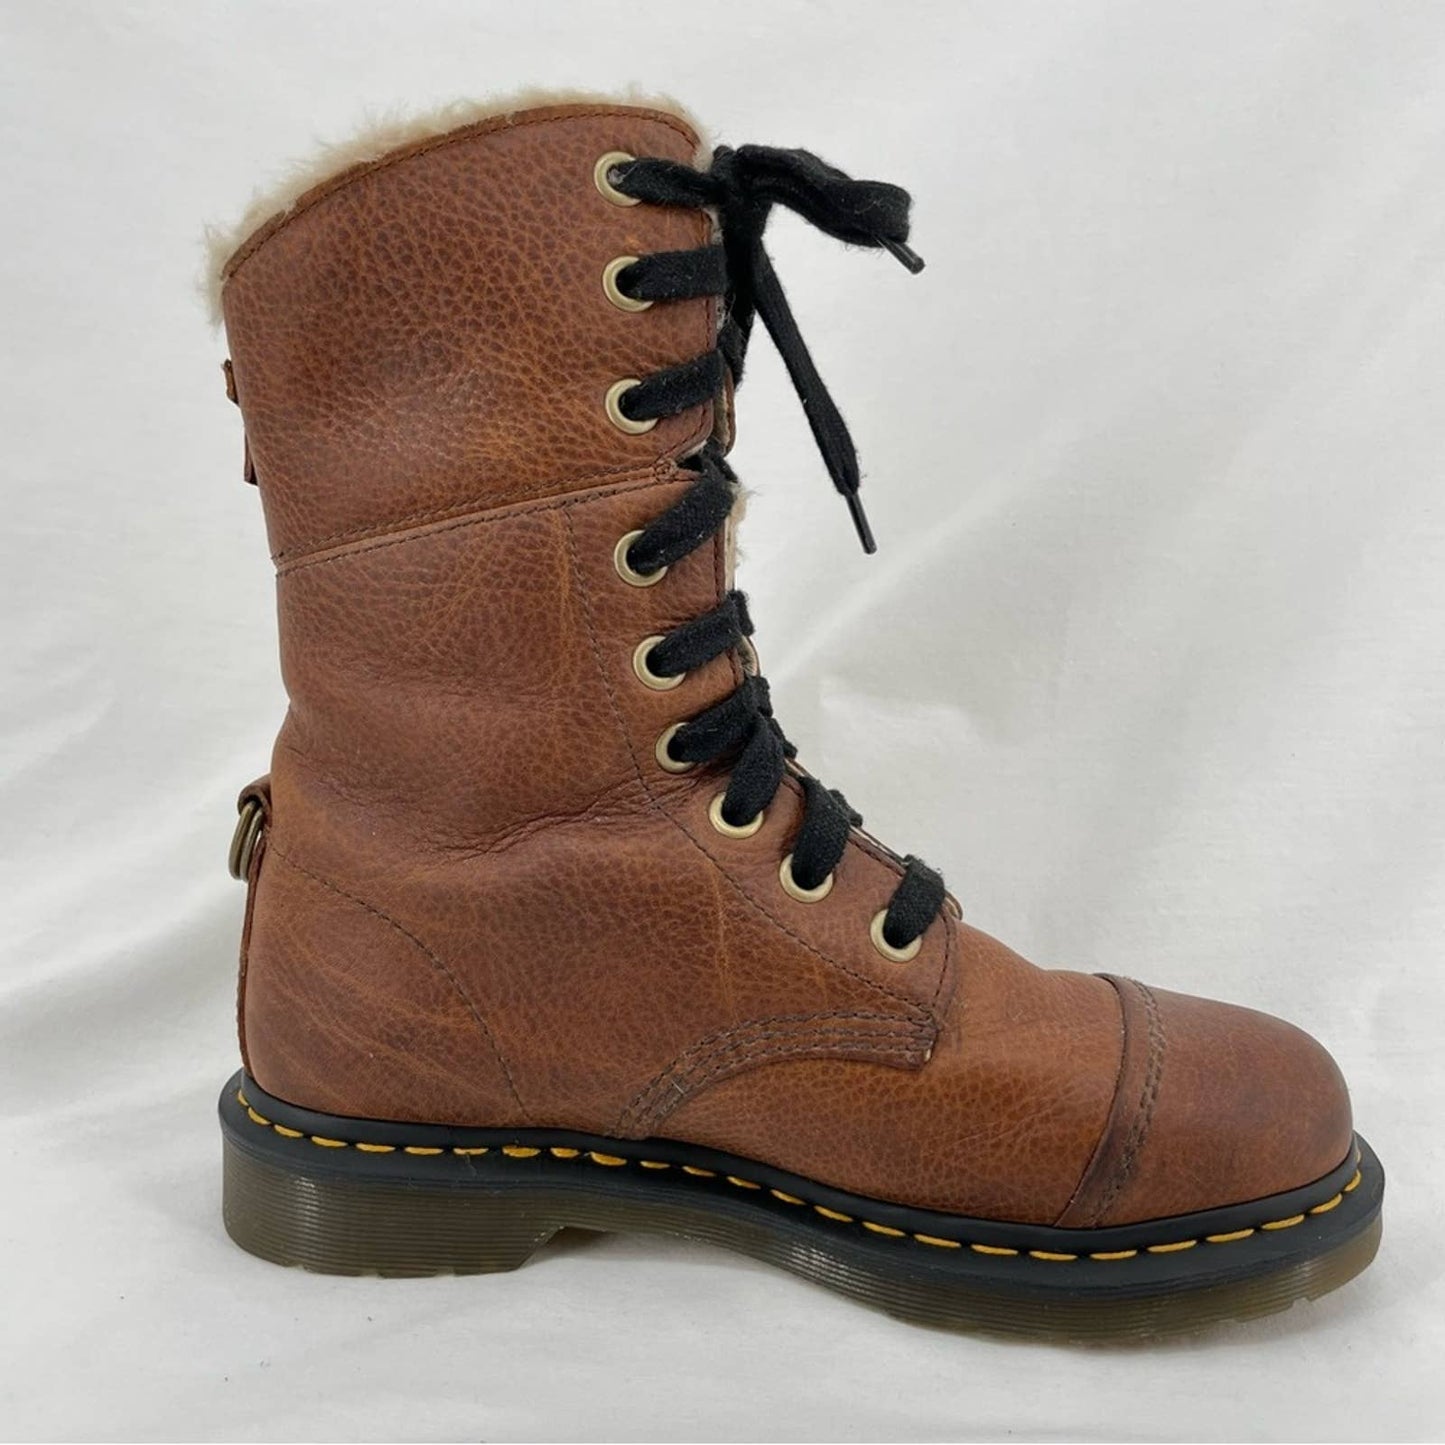 Dr. Martens Aimilita Fur Lined Tab Grizzly Leather Lace Up Winter Biker Boots Size 9